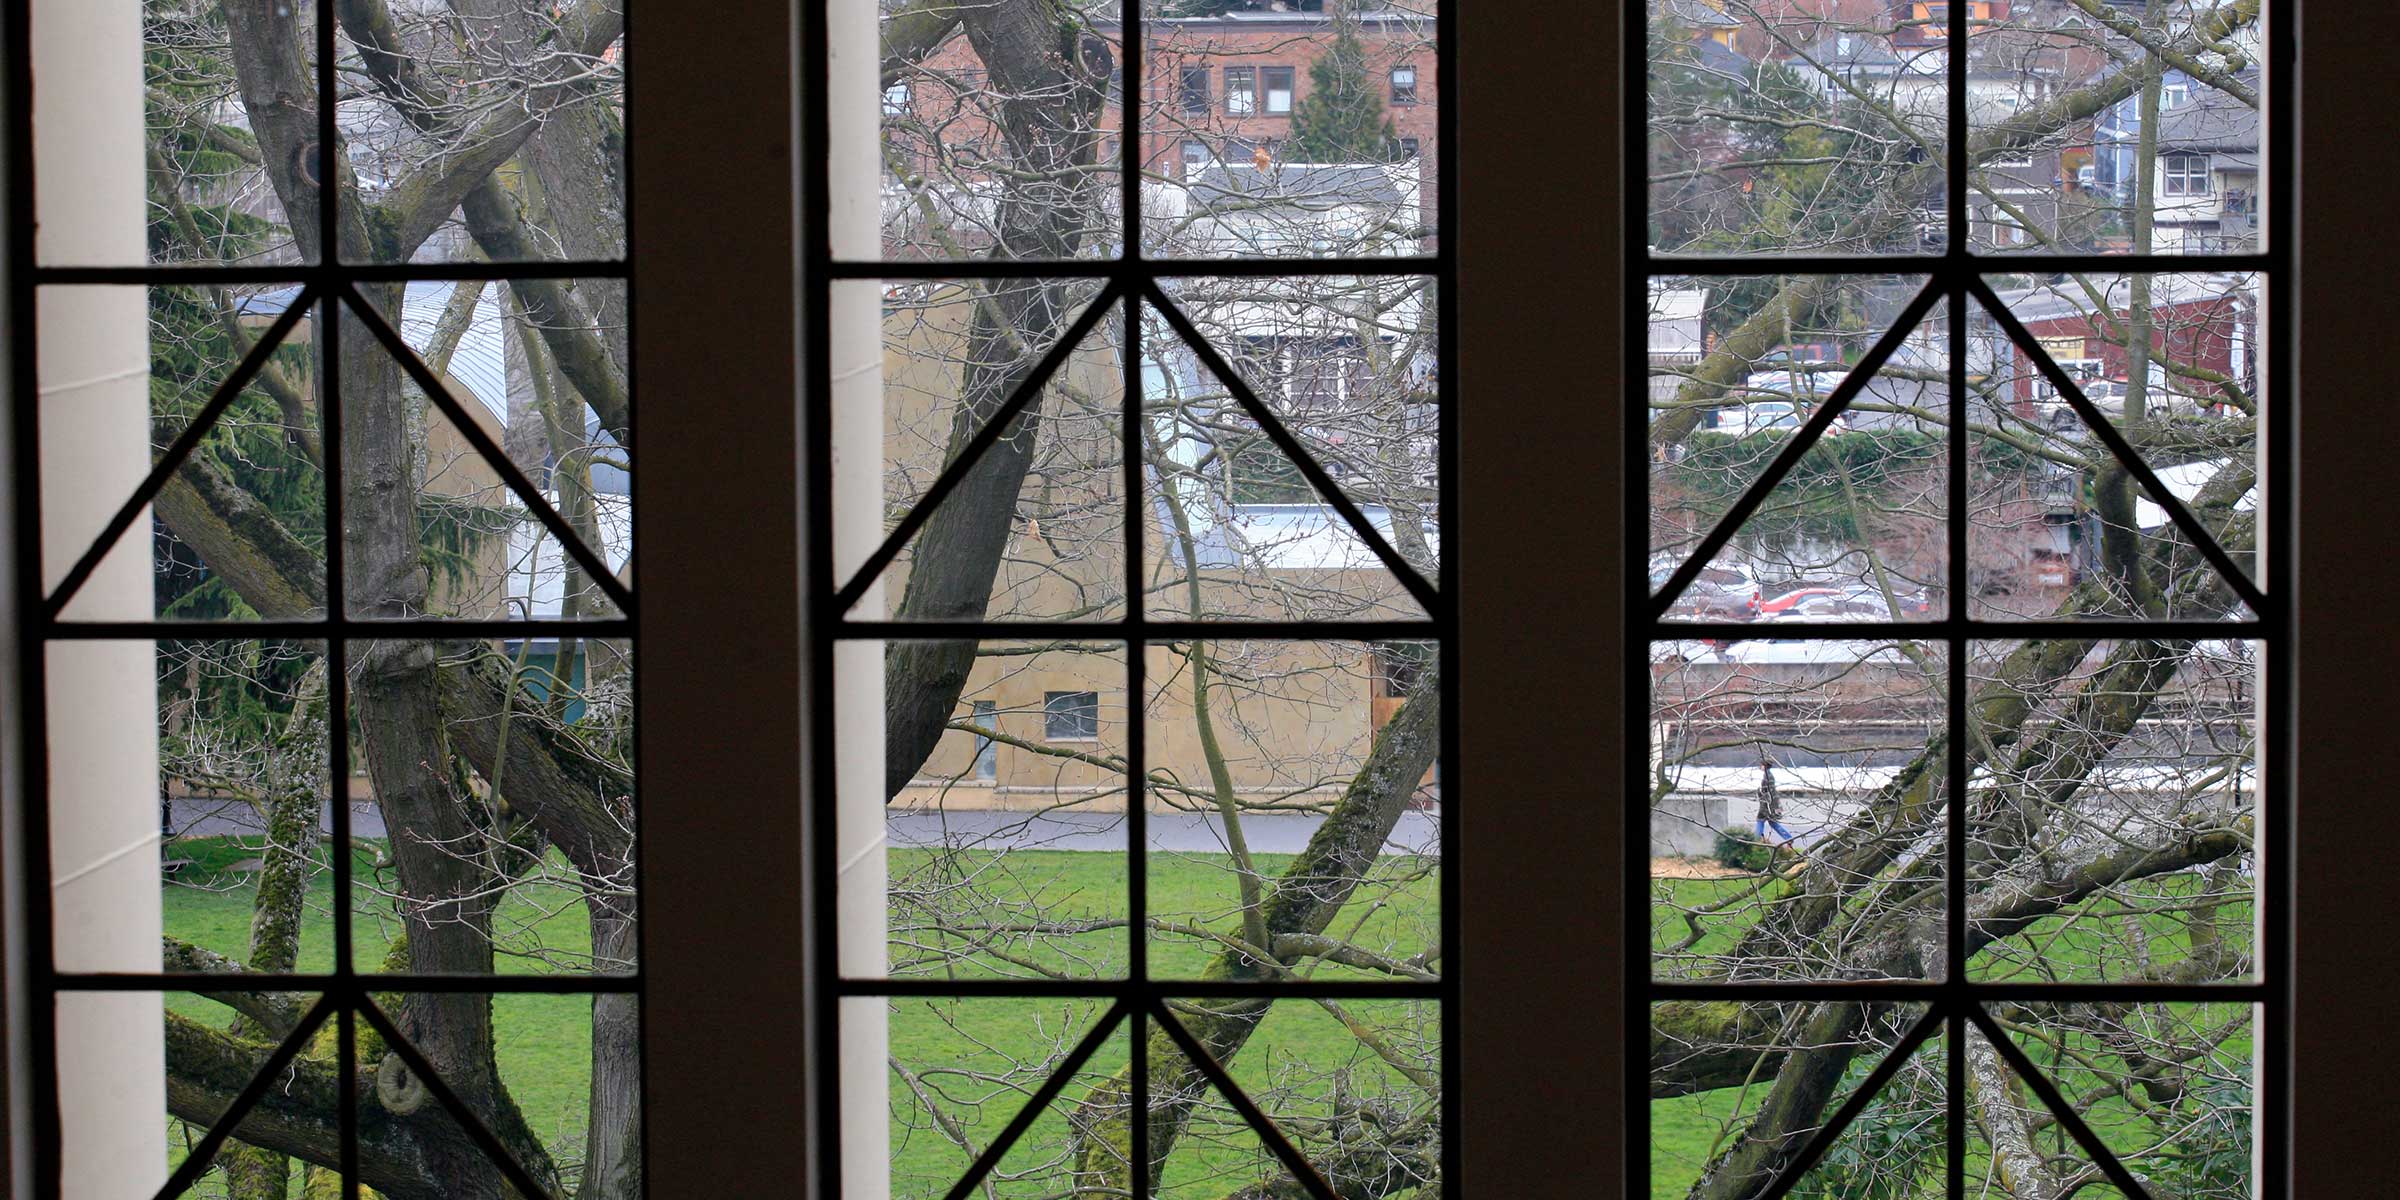 Looking out through the windows of the administration building toward the chapel